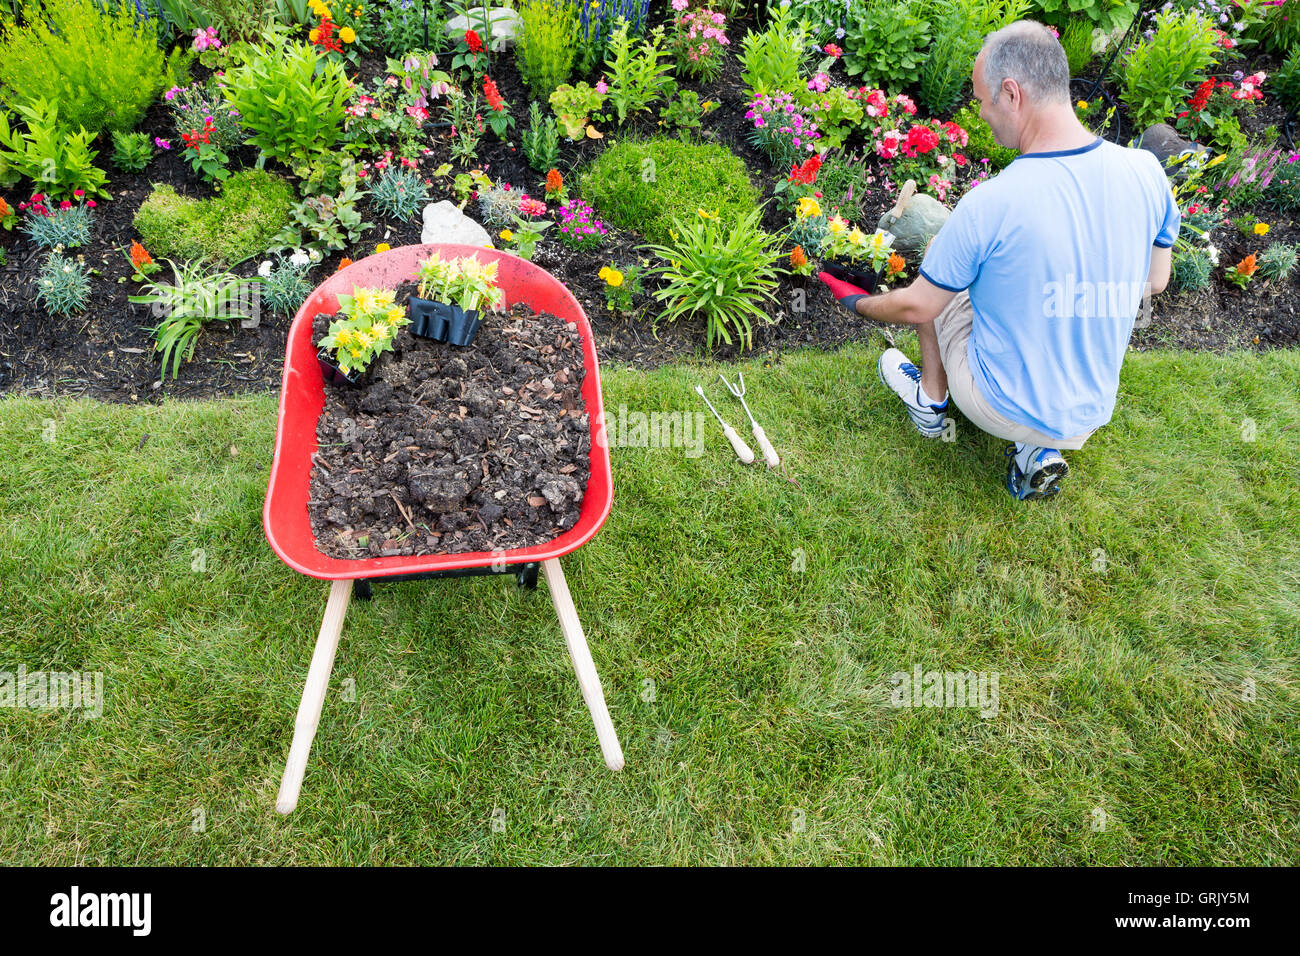 High angle view of a gardener landscaping a garden planting ornamental flowering plants, including yellow celosia, in a newly la Stock Photo